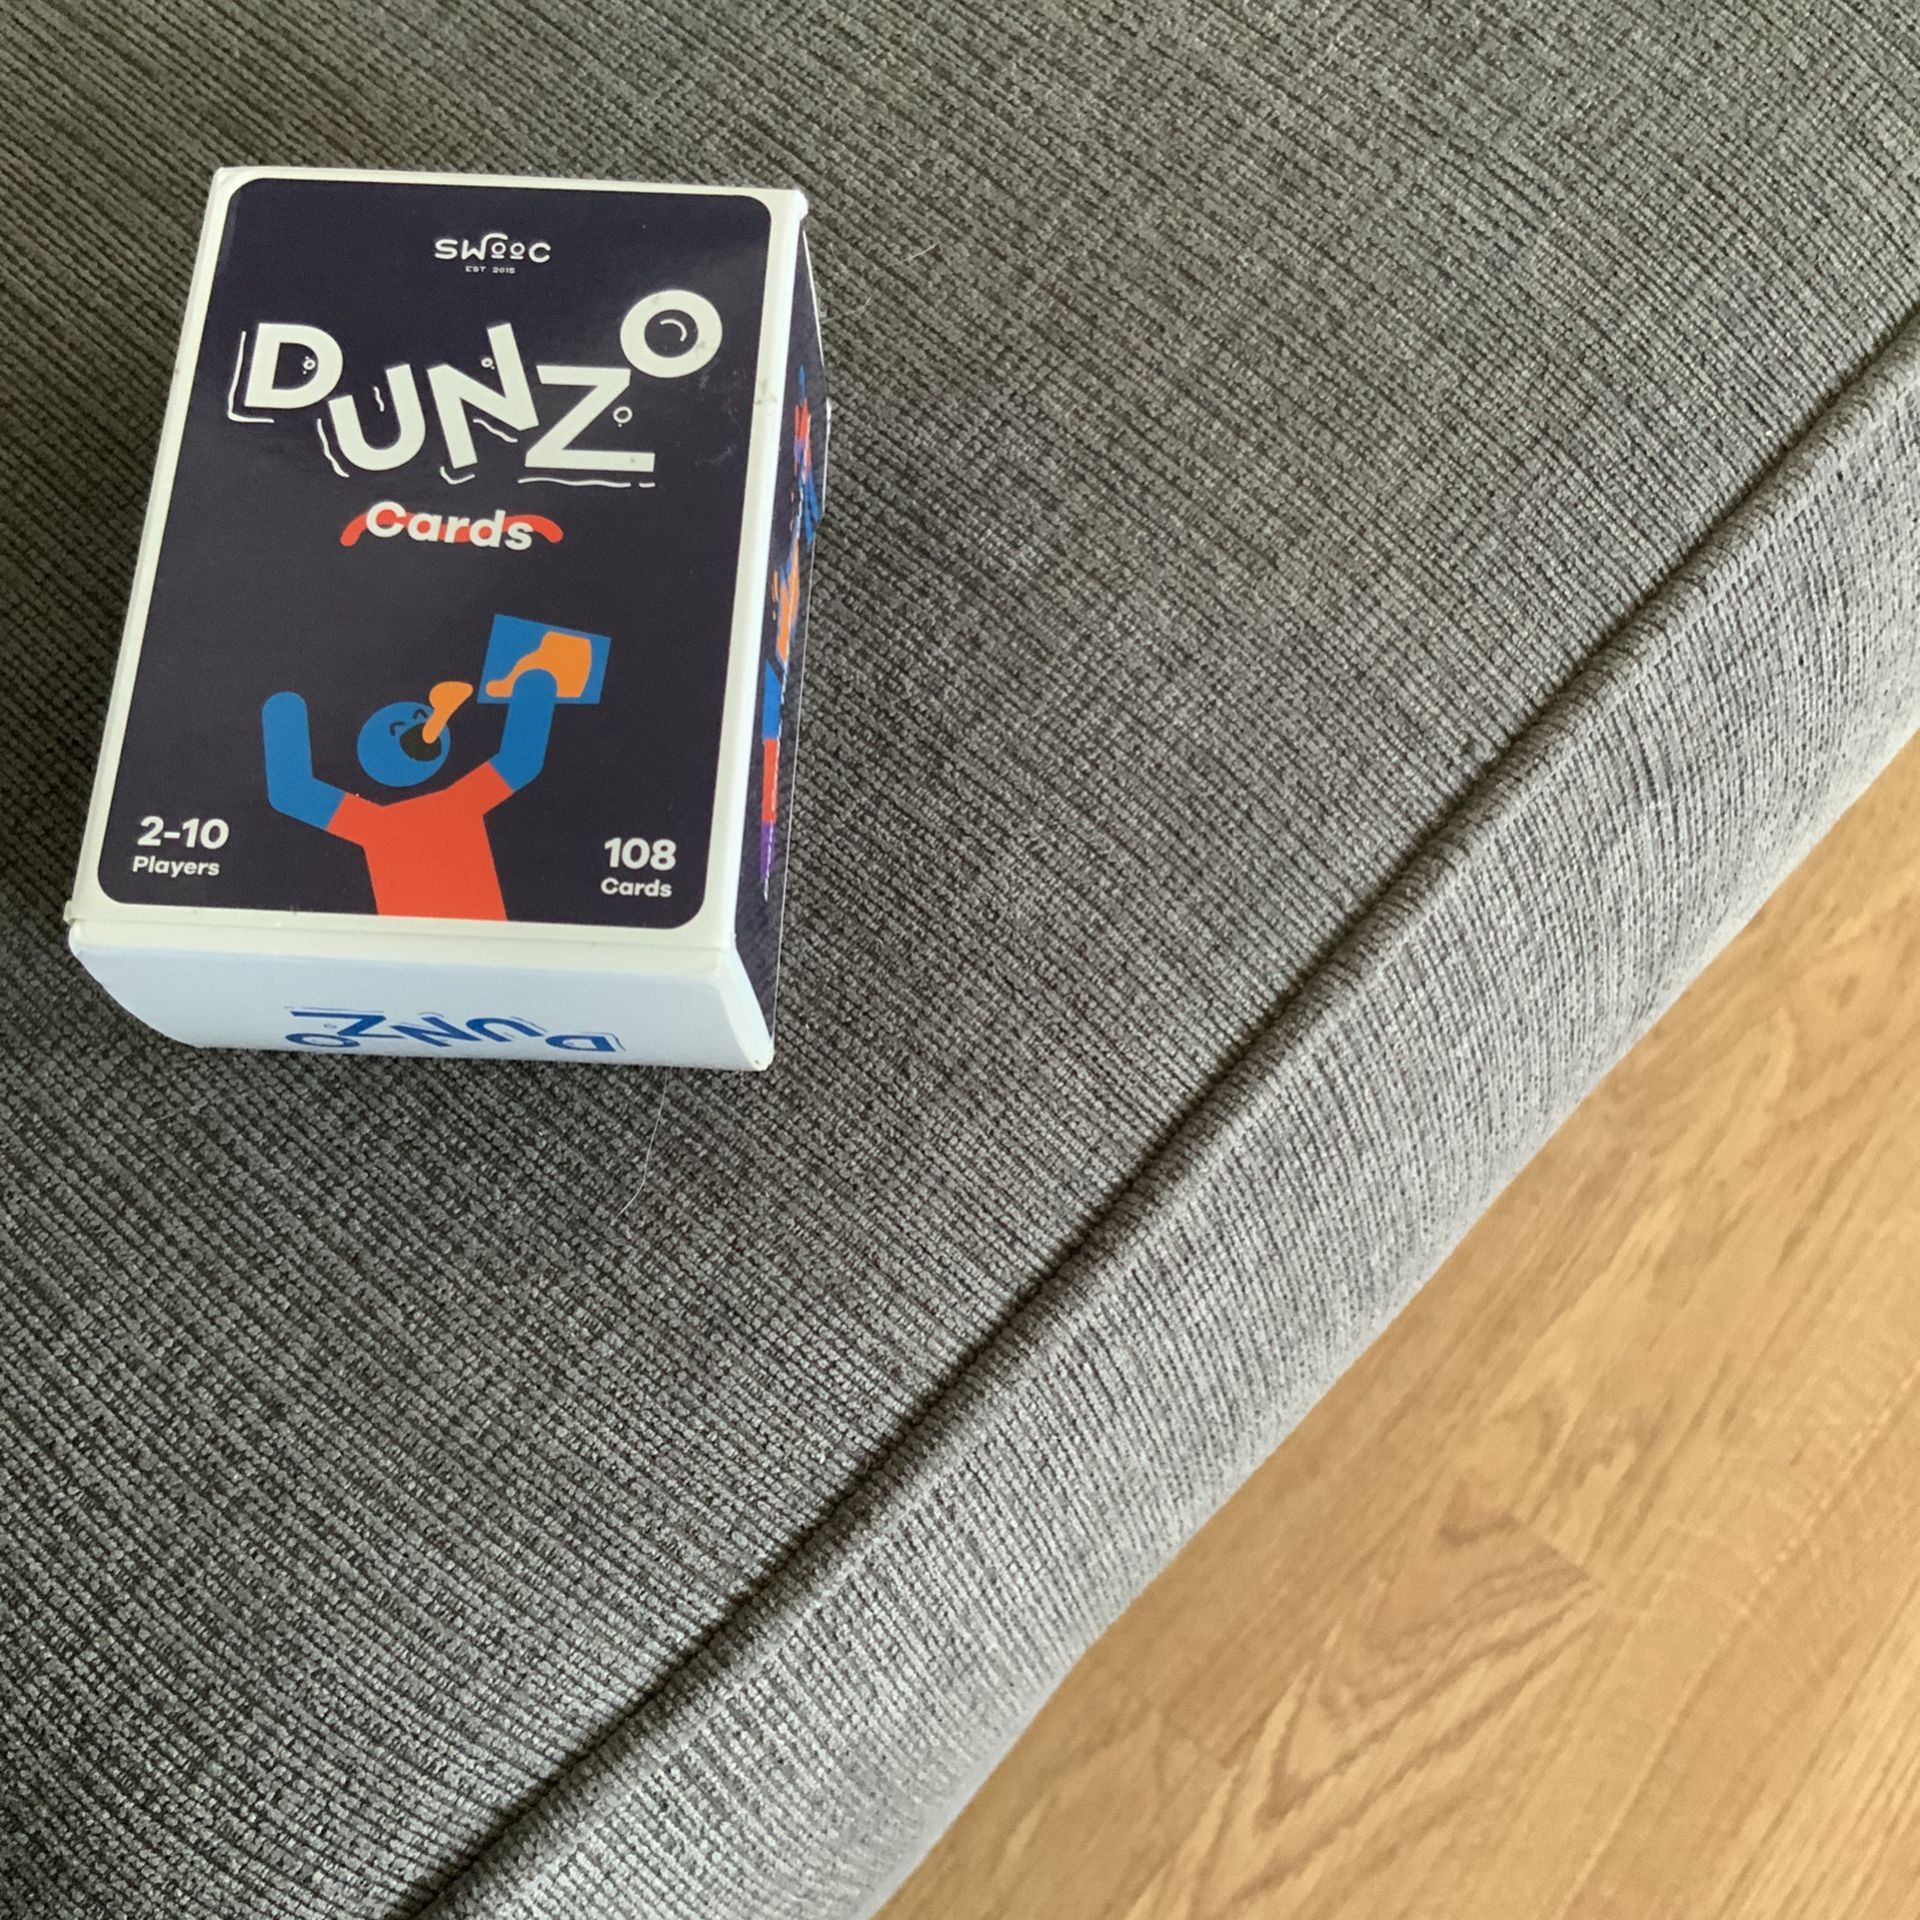 Dunzo Card Drinking Game New open Box 